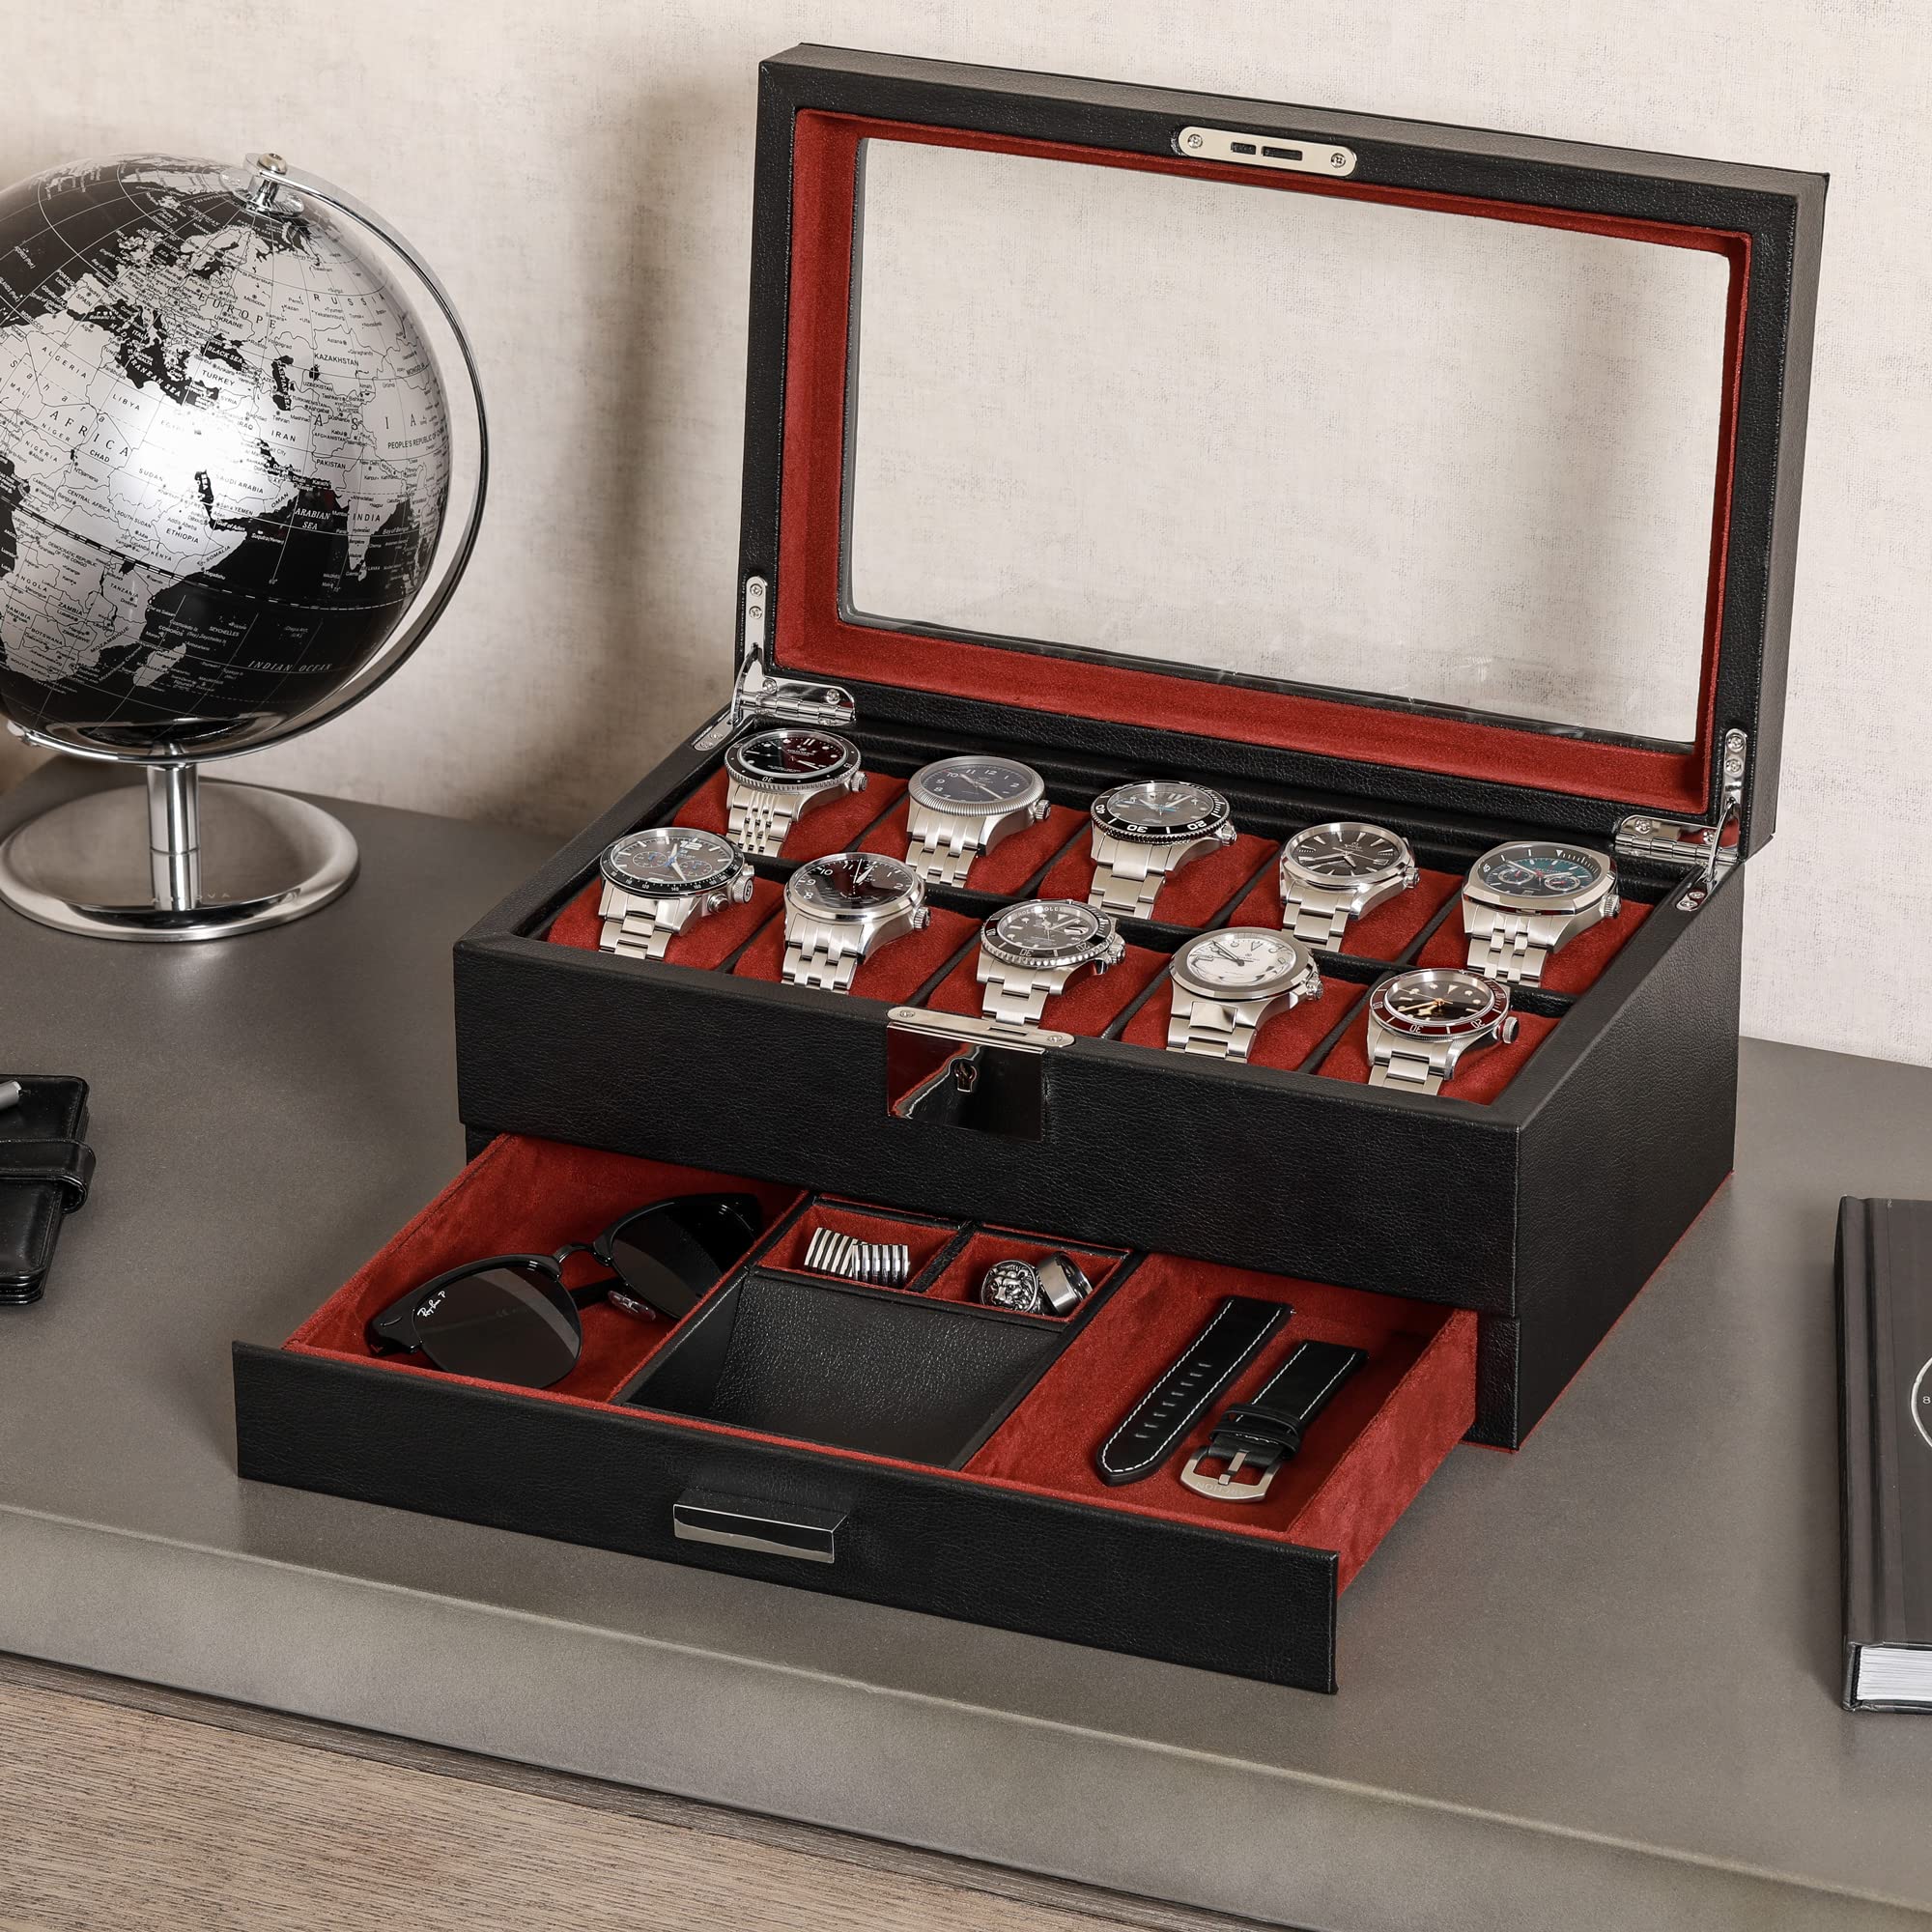 Gift Set 10 Slot Leather Watch Box with Valet Drawer & Matching 2 Watch Travel Case - Luxury Watch Case Display Organizer, Locking Mens Jewelry Watches Holder, Men's Storage Boxes Glass Top Black/Red